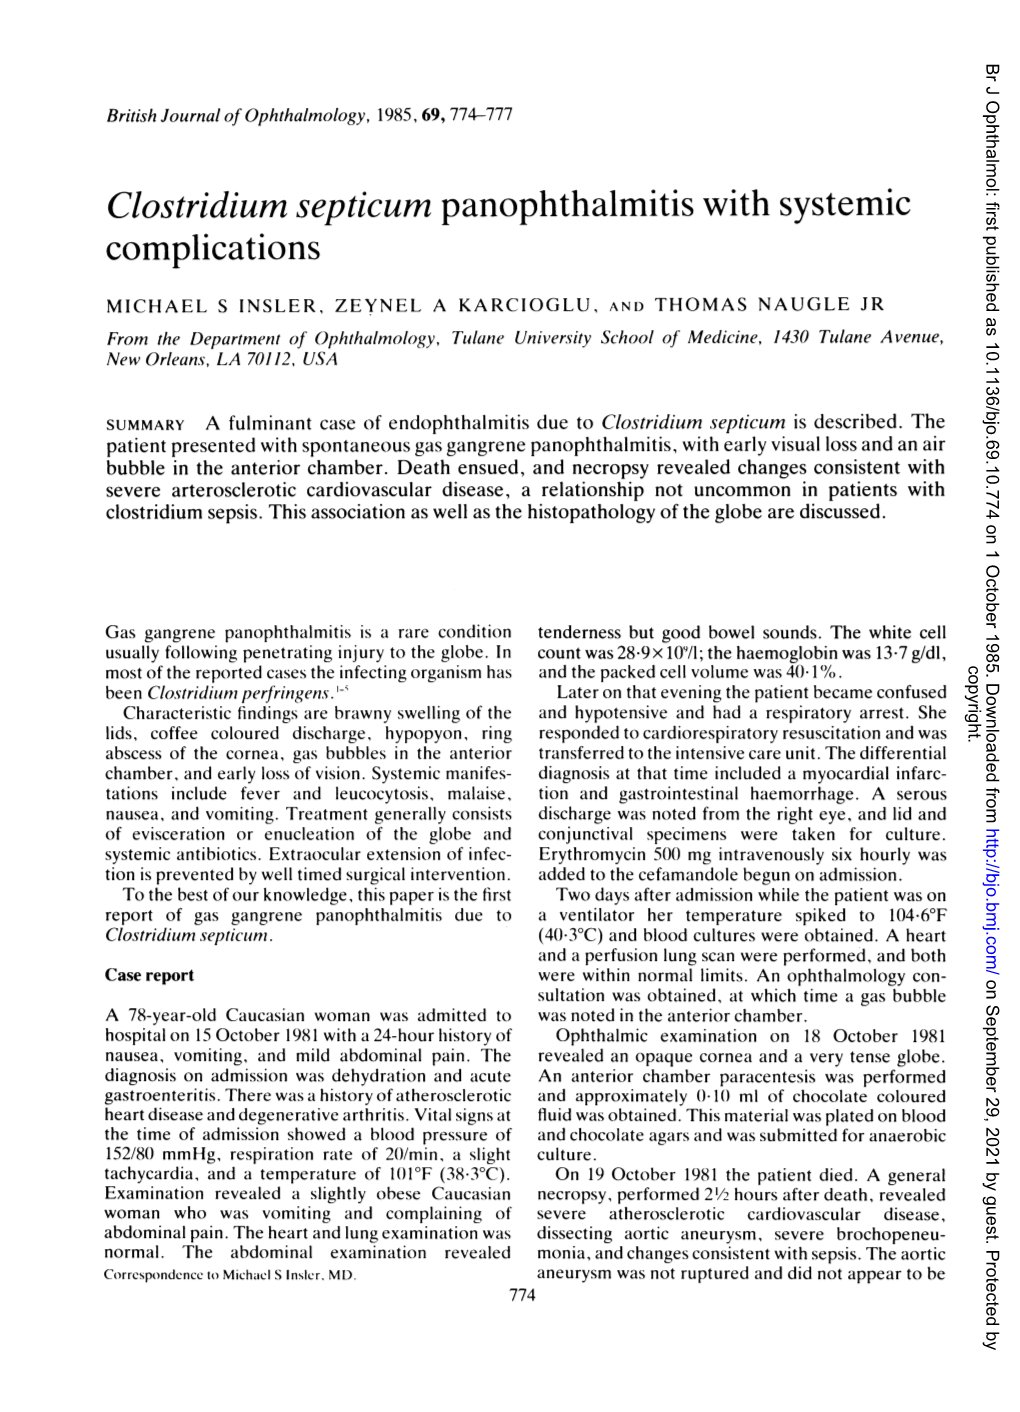 Clostridium Septicum Panophthalmitis with Systemic Complications